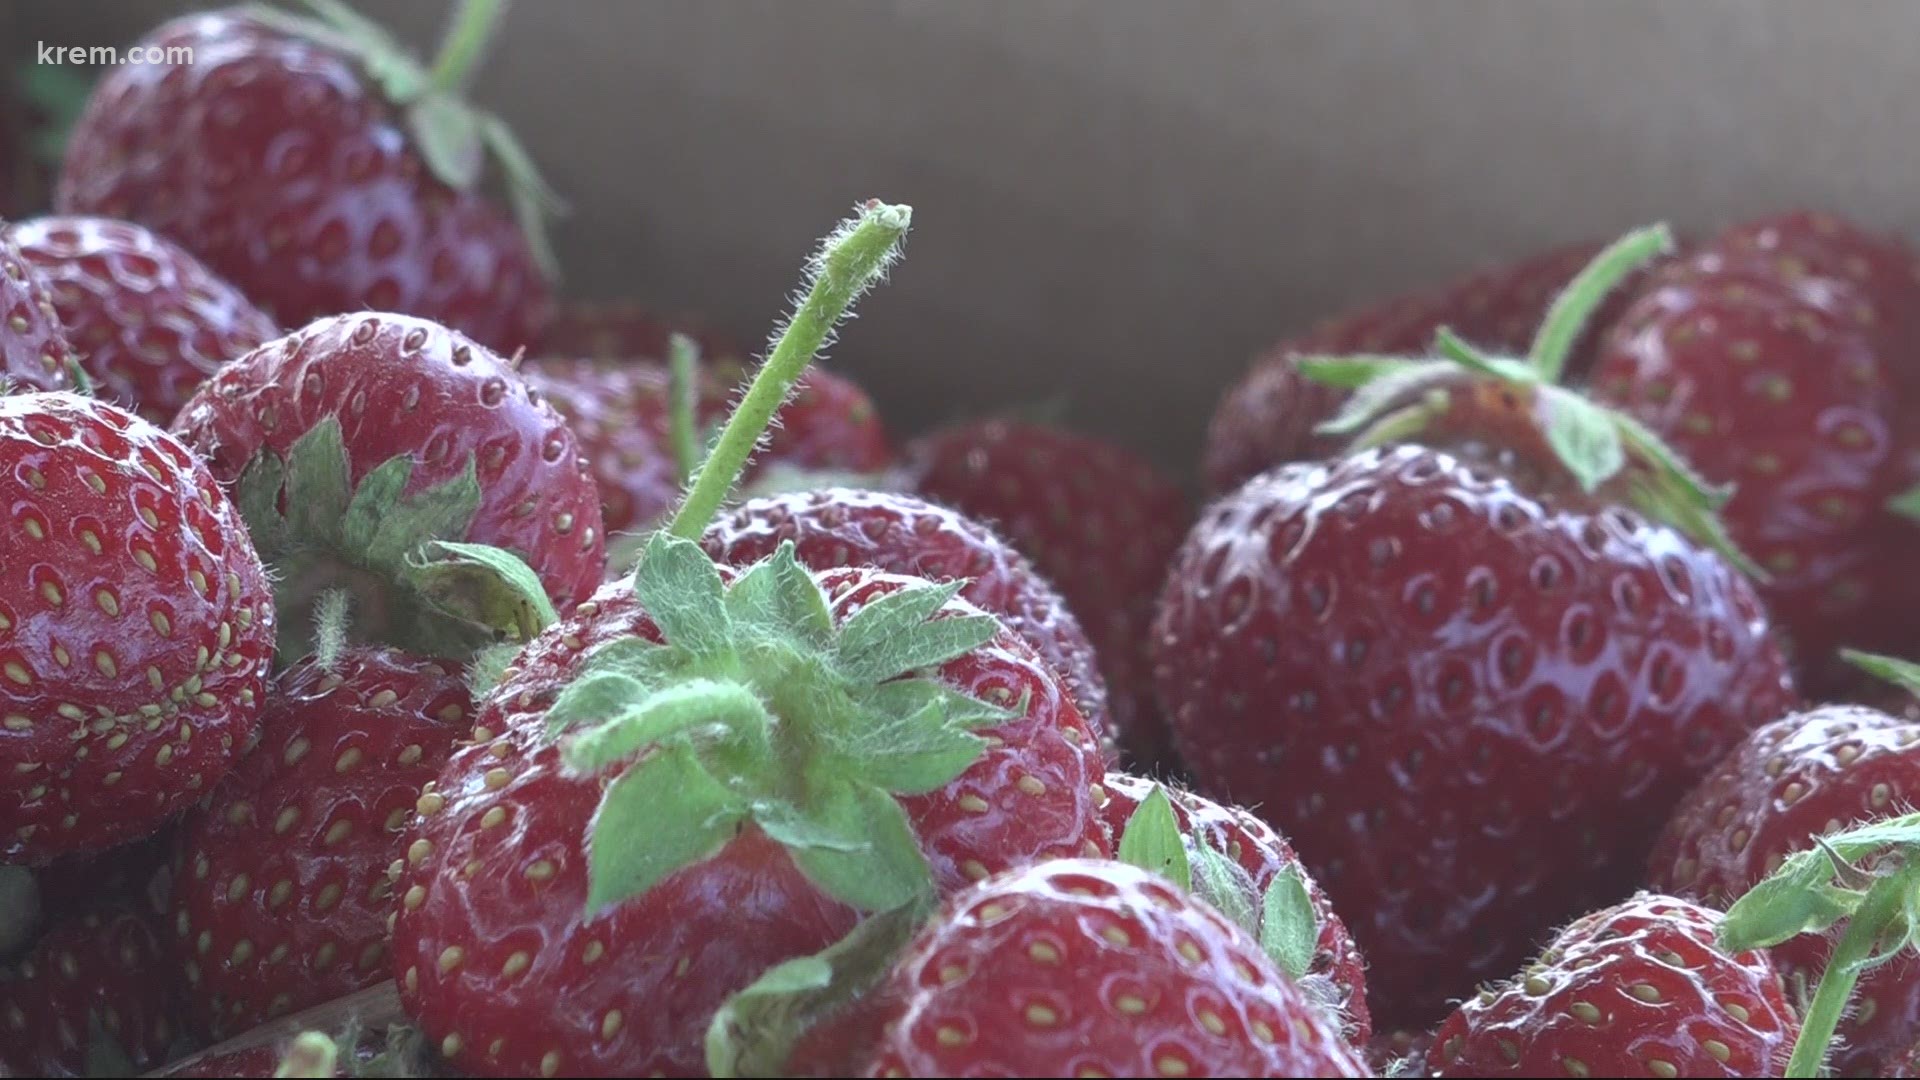 Temperatures in the hundreds aren't suitable for strawberries, which is why Walters' Fruit Ranch is inviting the community to come get them while they are ripe.